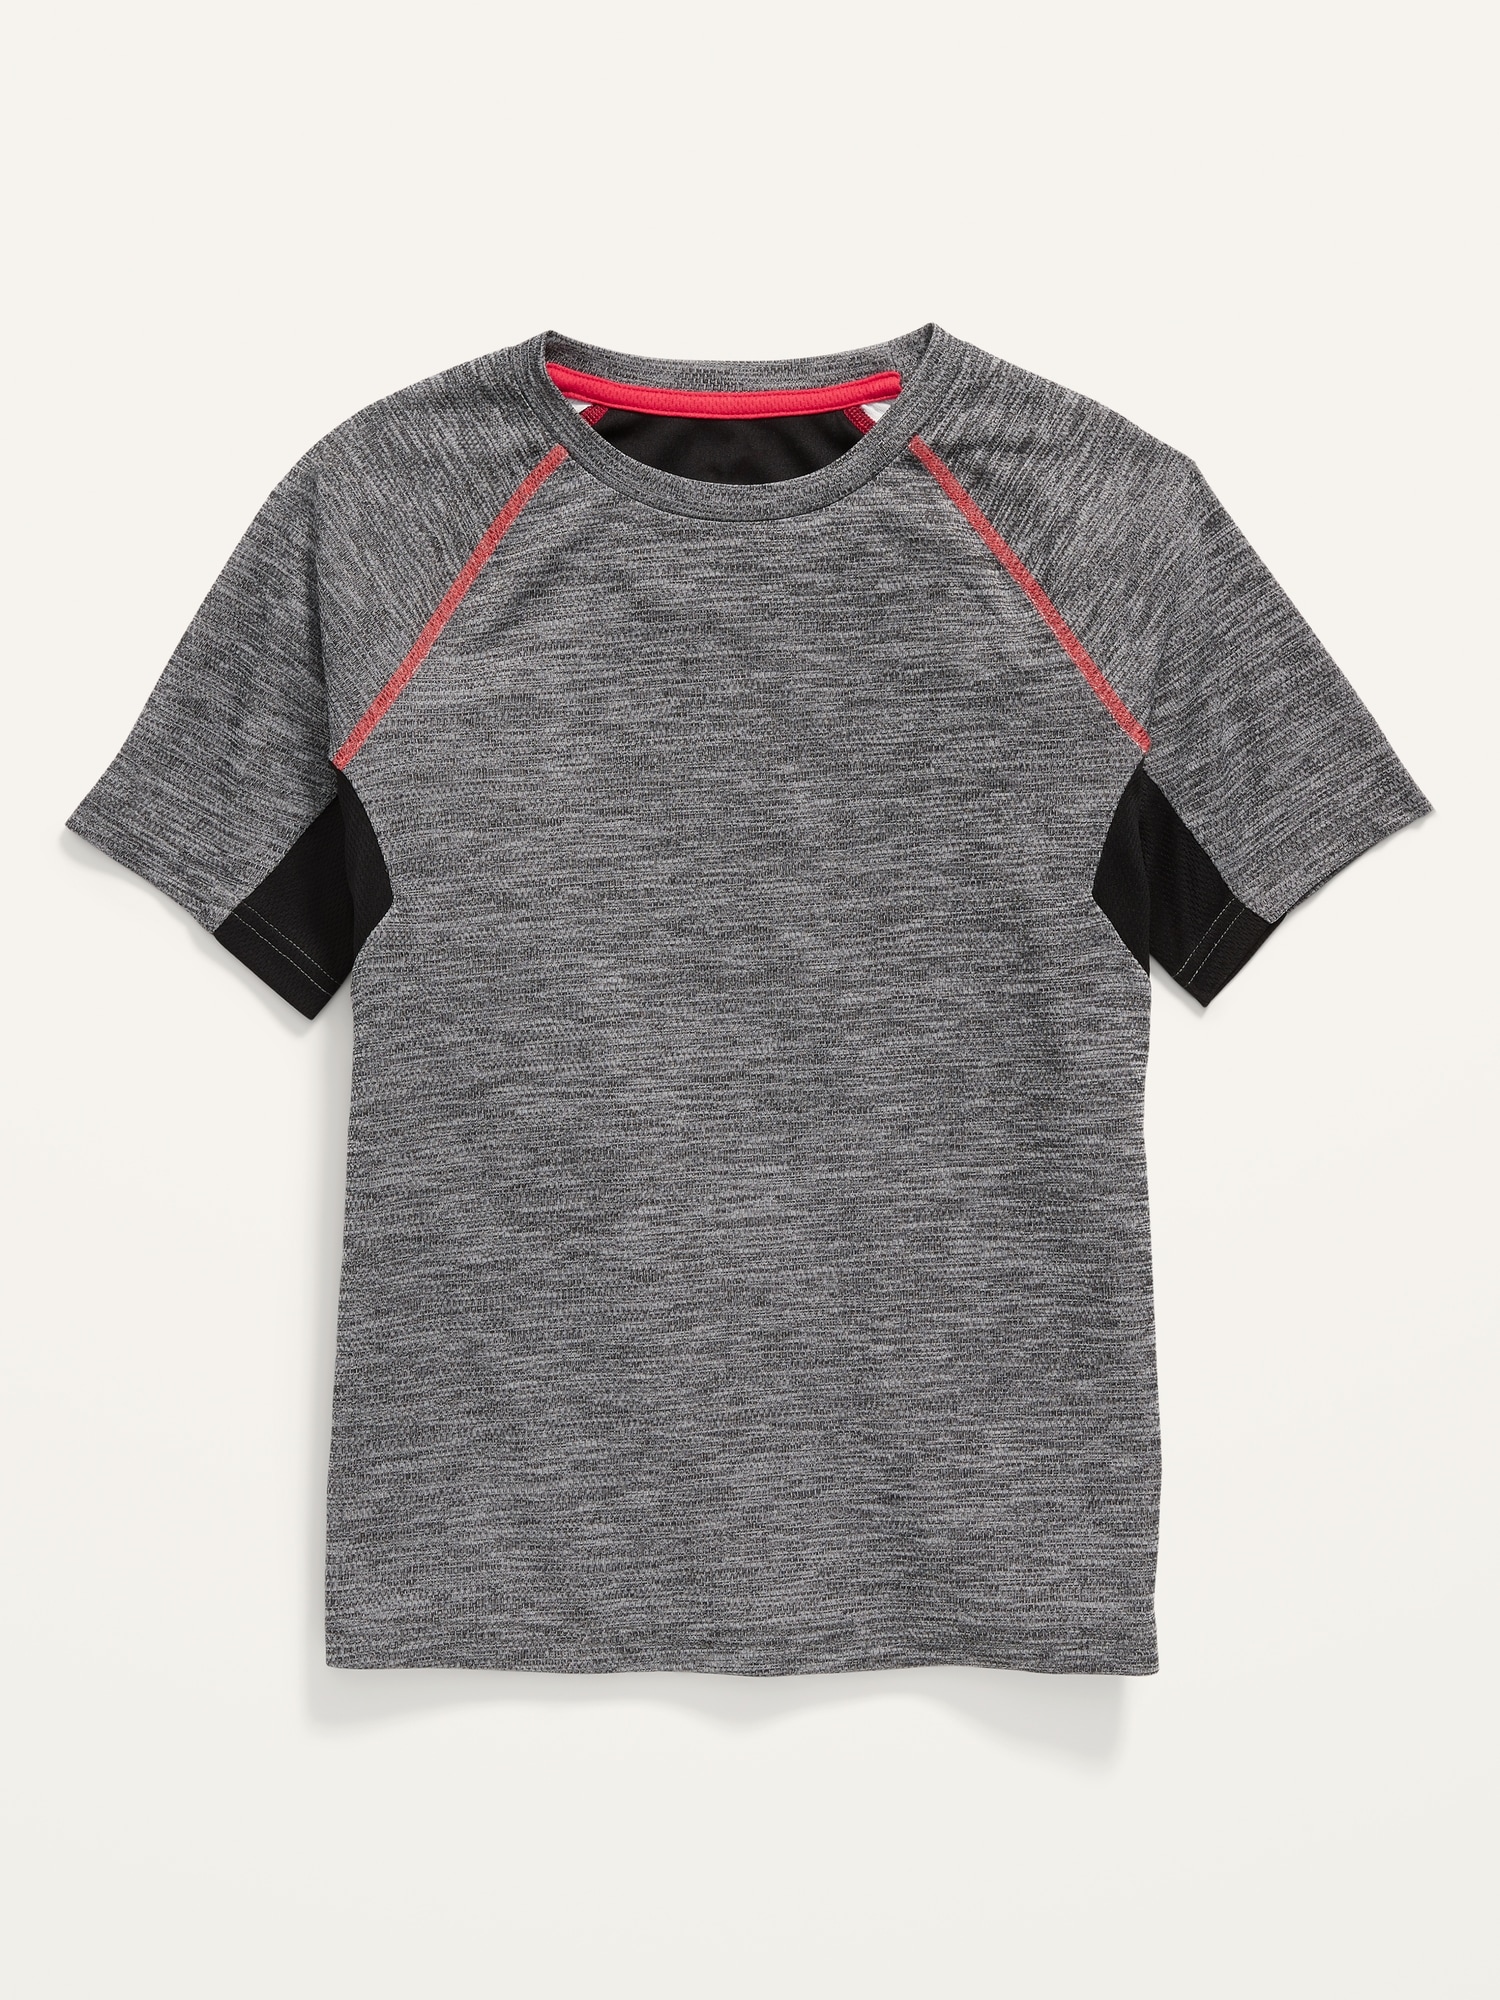 Old Navy Go-Dry Color-Blocked Mesh Performance T-Shirt For Boys gray. 1